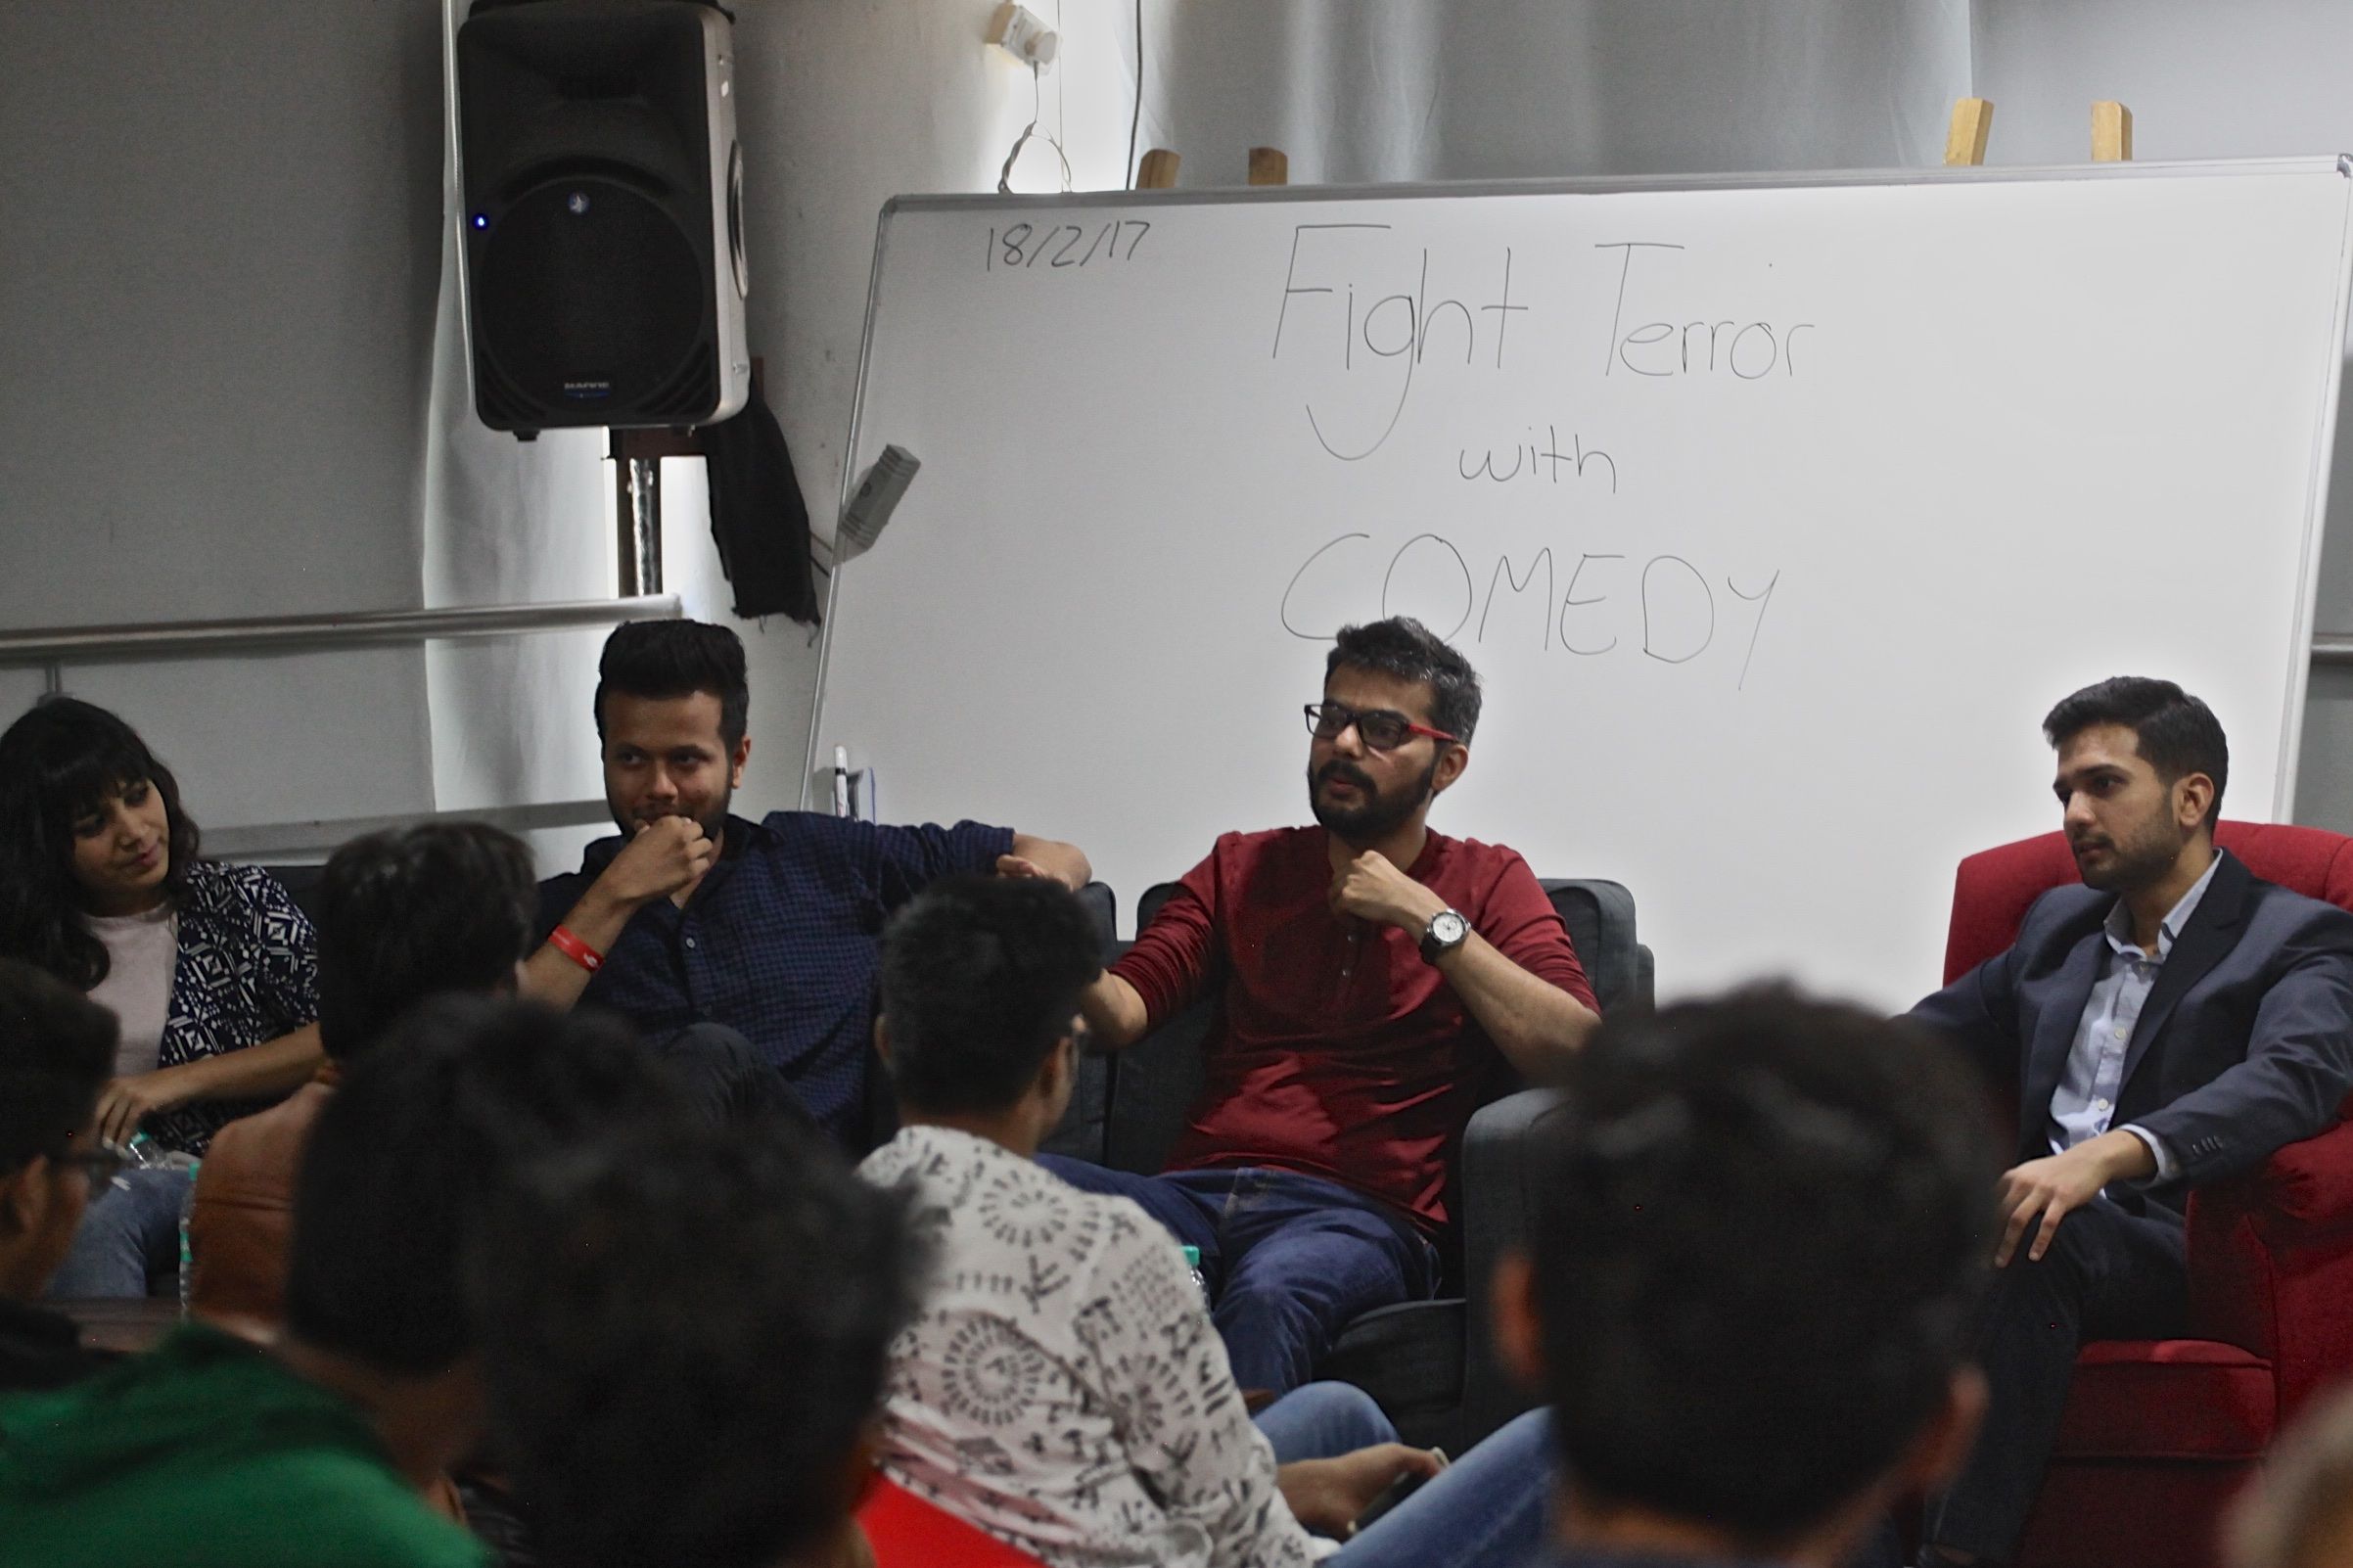 East India Comedy members Sapan Verma and Kunal Rao with Priyank Mathur addressing the audience at the workshop “Fighting Terror With Comedy." Image by Wes Bruer. India, 2017.